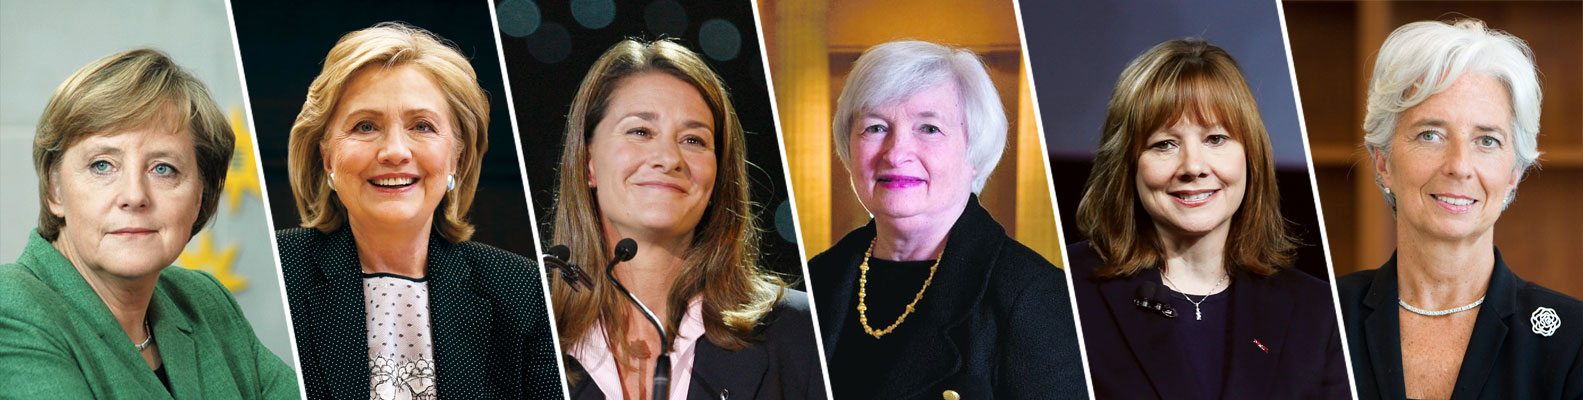 The World's 100 Most Powerful Women 2015